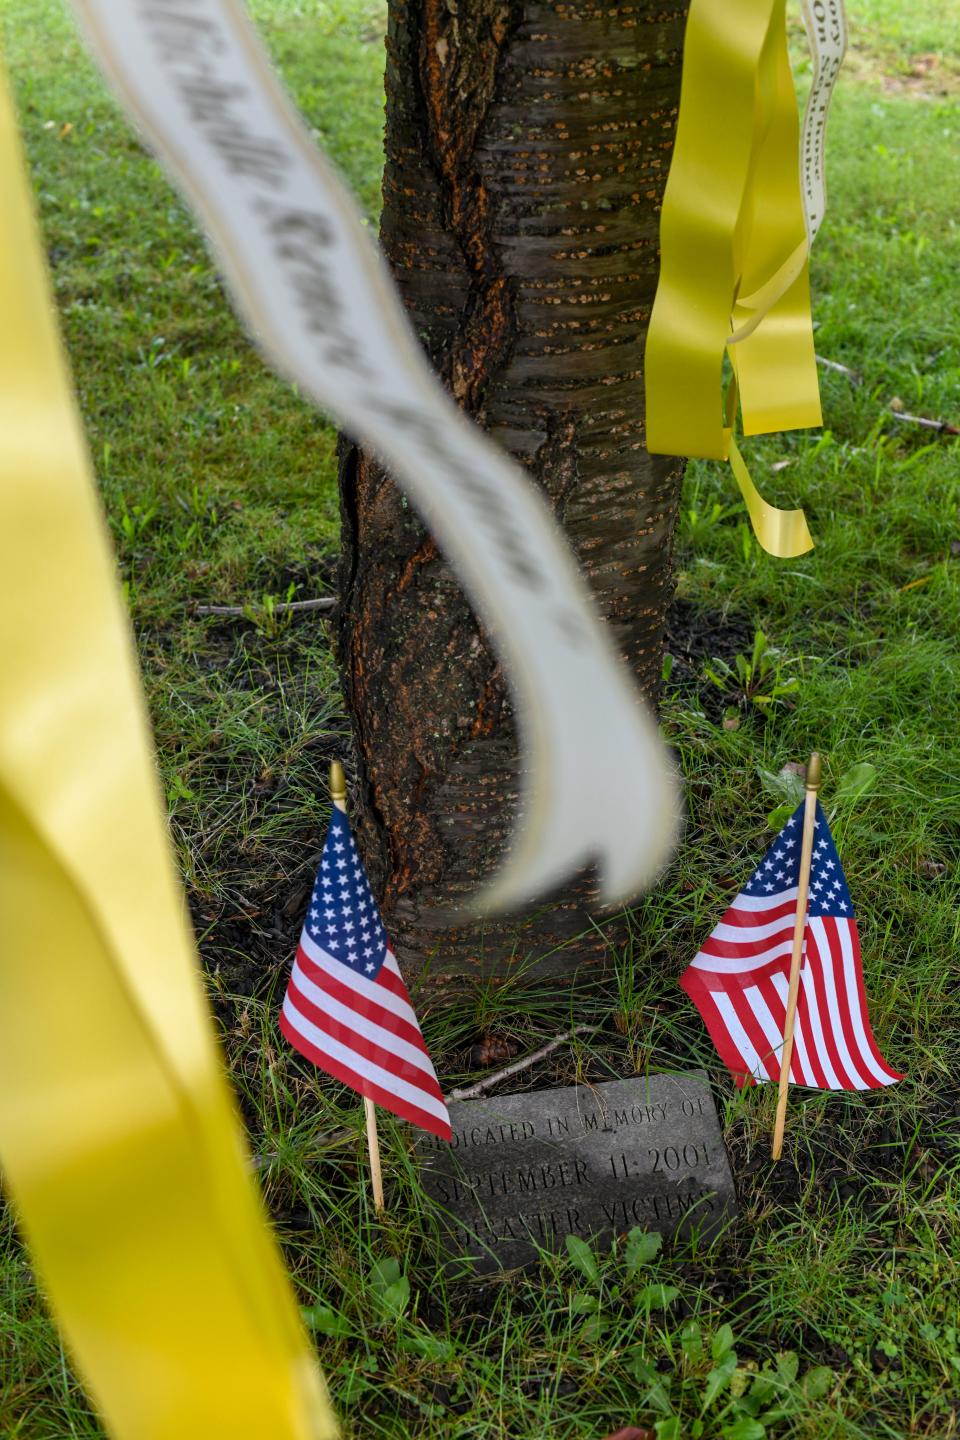 A memorial tree planted to honor victims of Sept. 11, 2001 is seen at the Families for Peaceful Tomorrows memorial service in Port Jervis, NY.